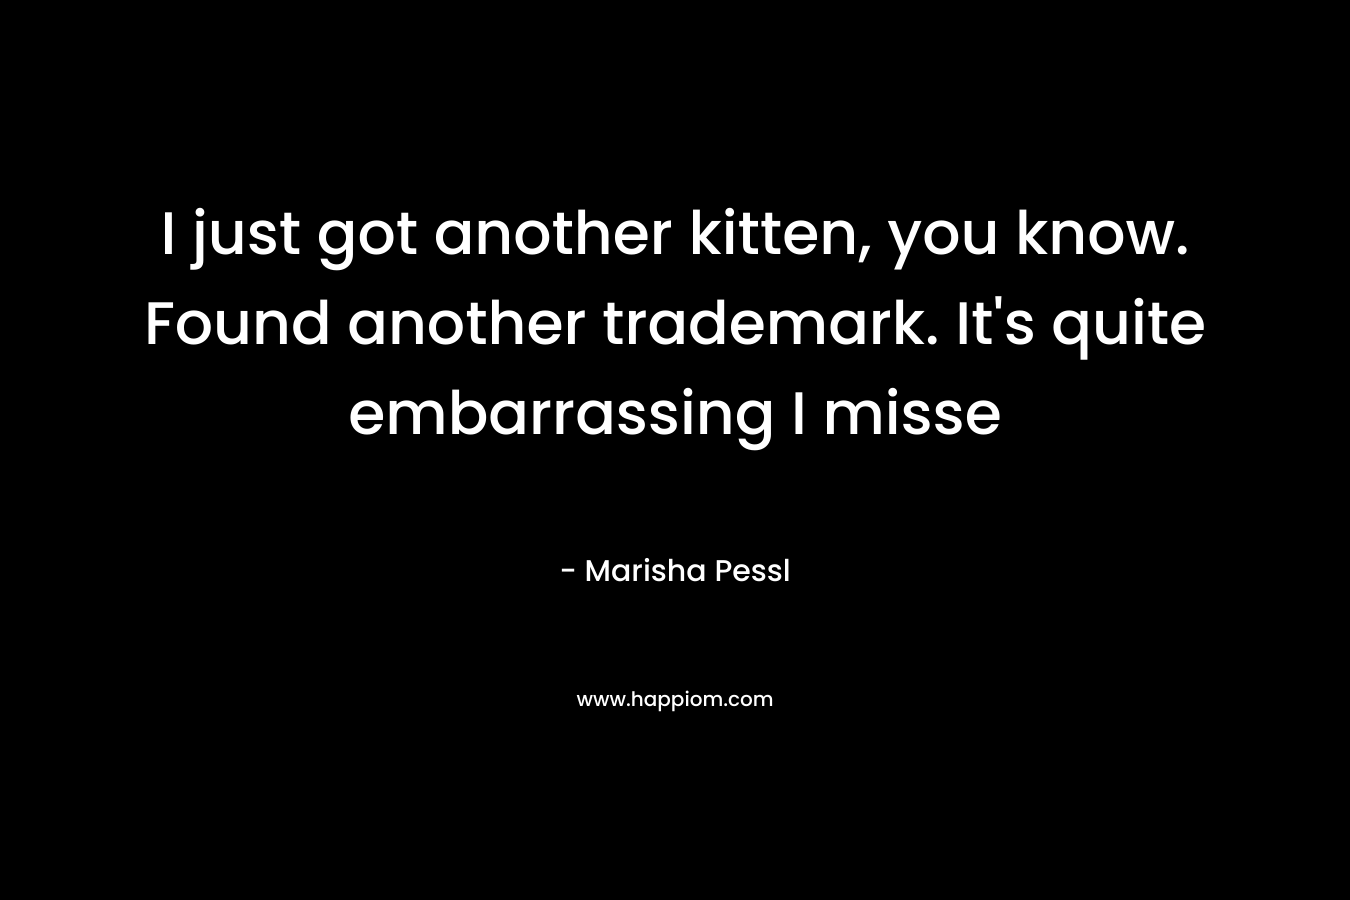 I just got another kitten, you know. Found another trademark. It’s quite embarrassing I misse – Marisha Pessl